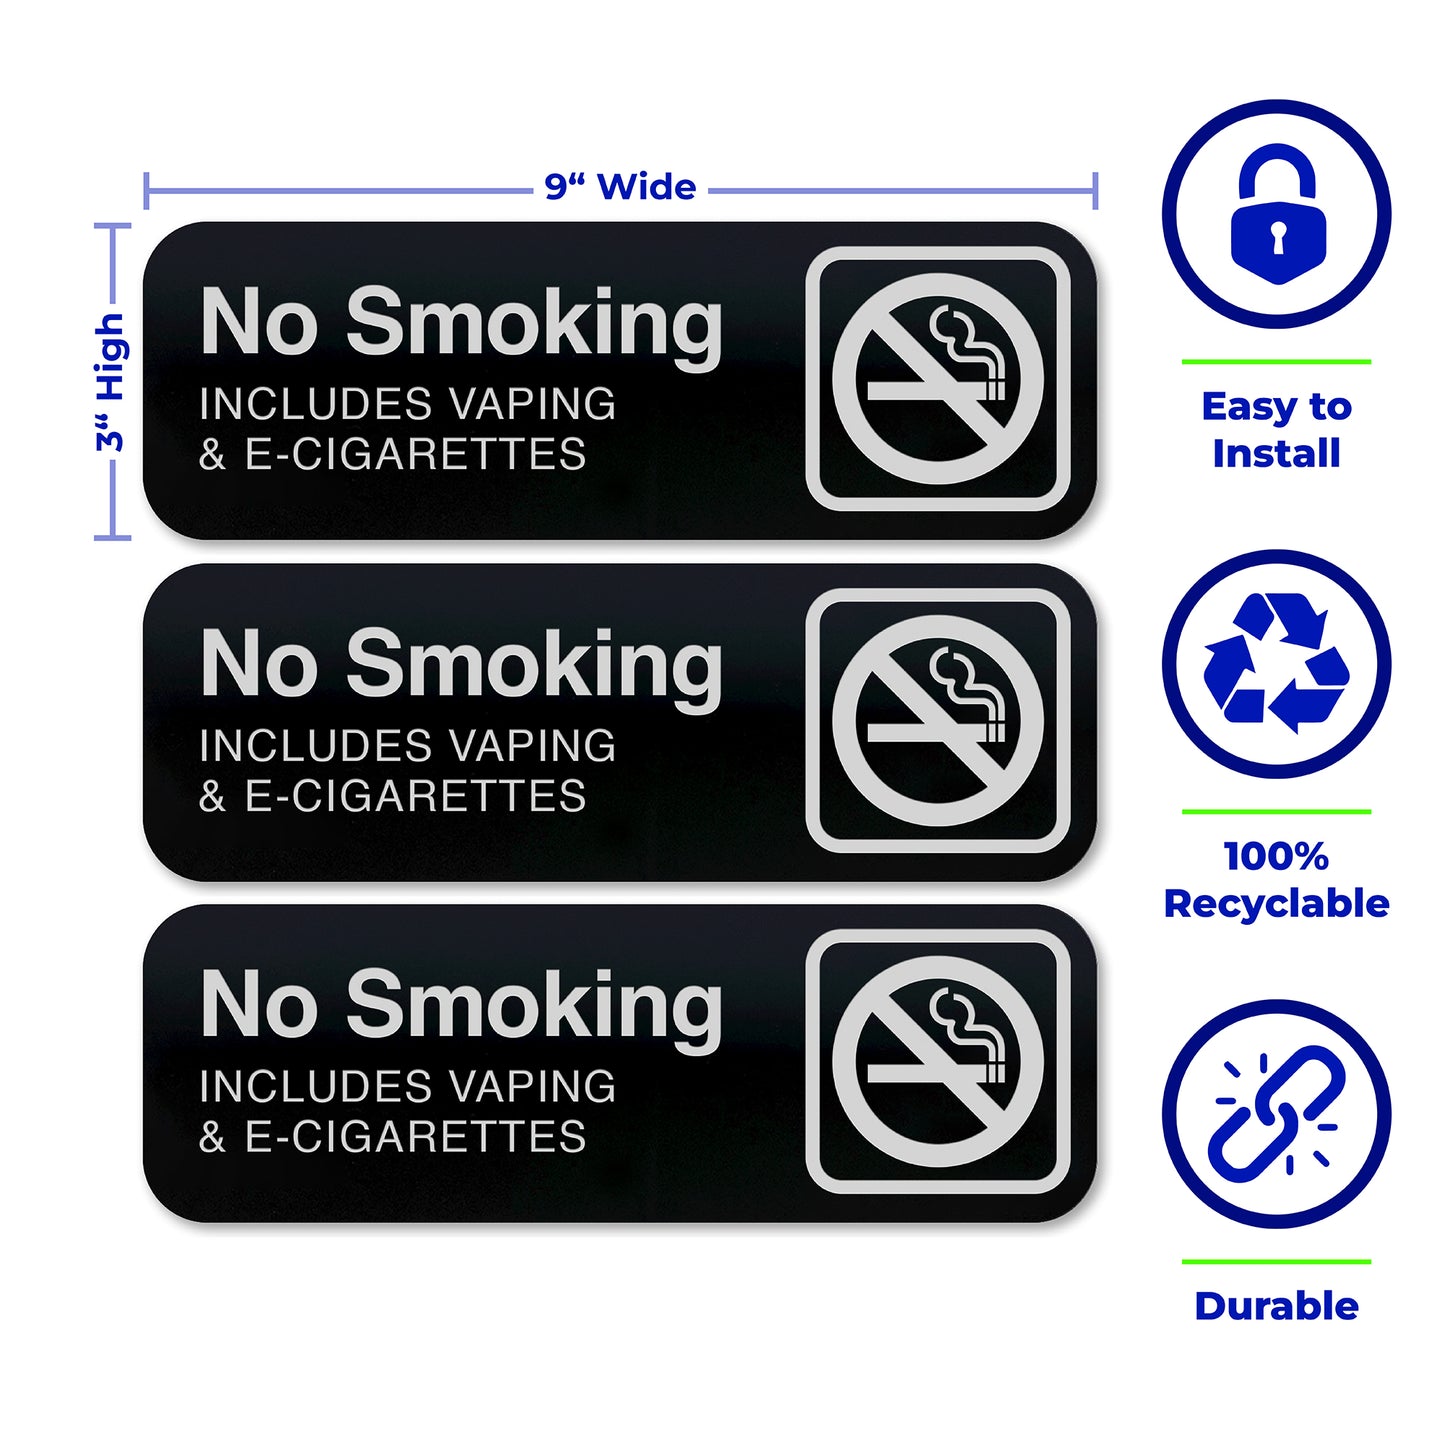 No Smoking Sign Package, NO SMOKING INCLUDING VAPING & E-CIGARETTES, Black Acrylic, White Text, 9"x 3" - SET OF 3